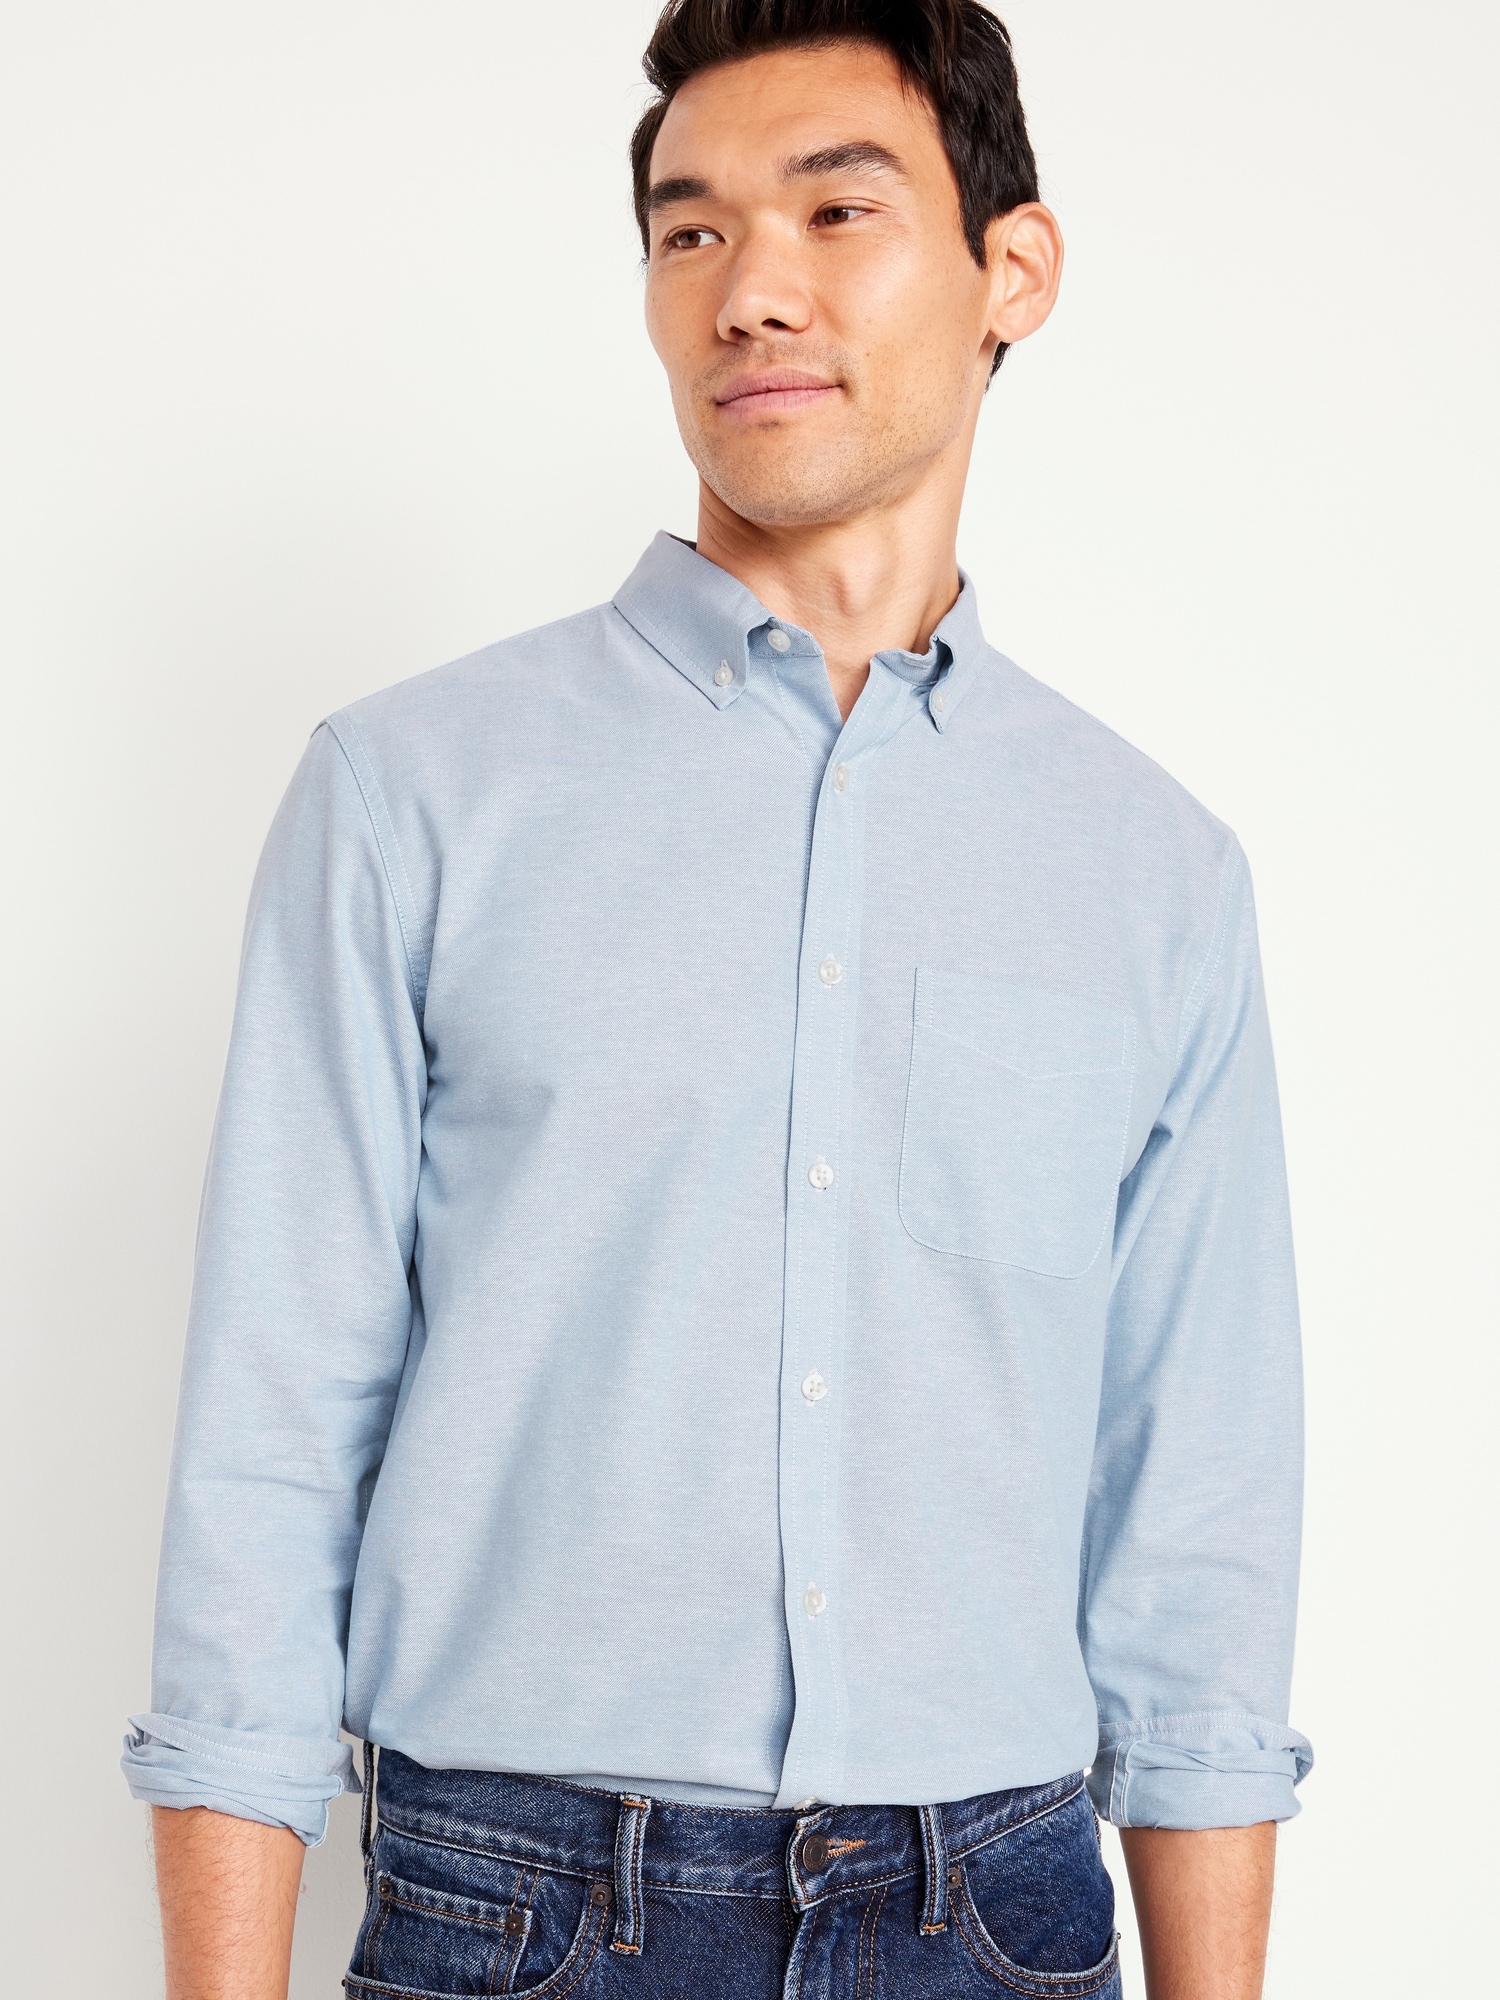 Slim Fit Shirts | Old Navy